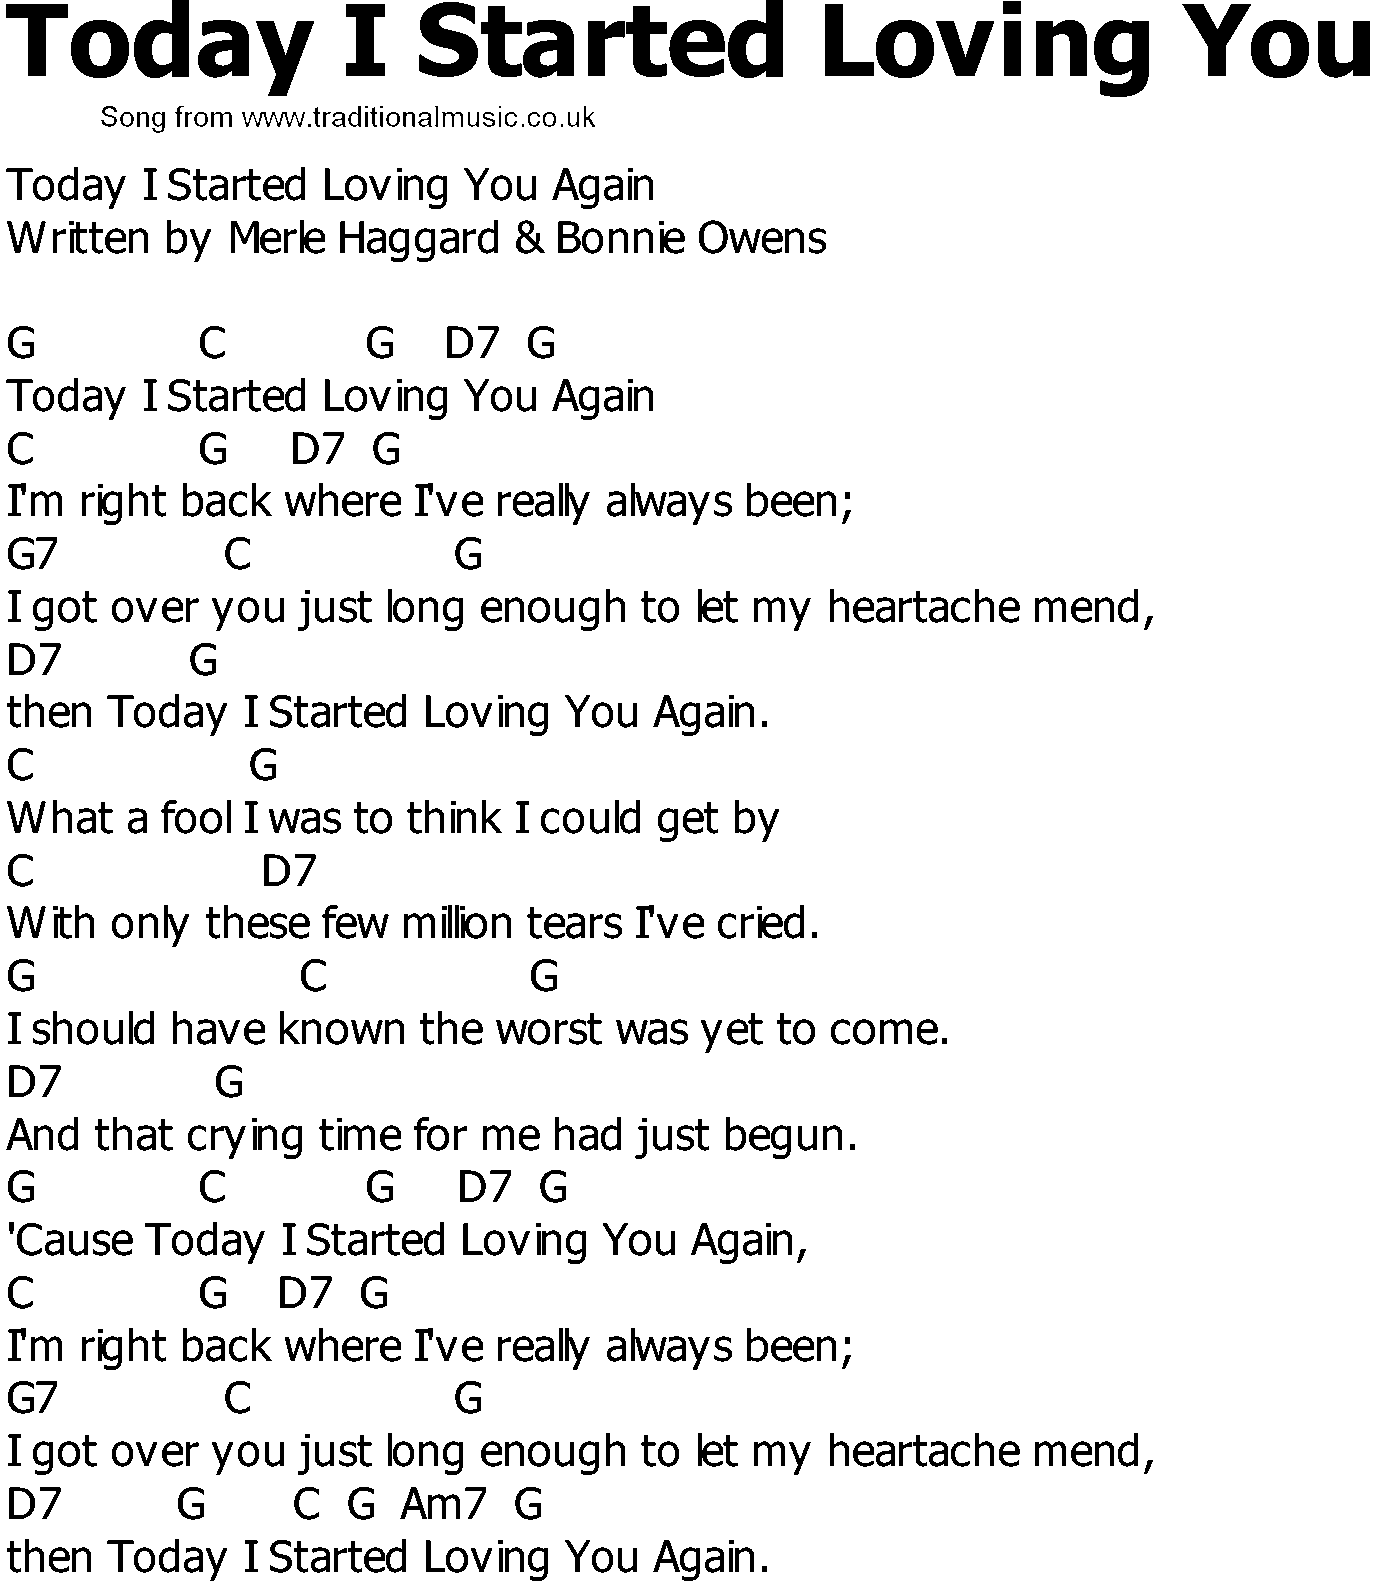 Old Country song lyrics with chords - Today I Started Loving You